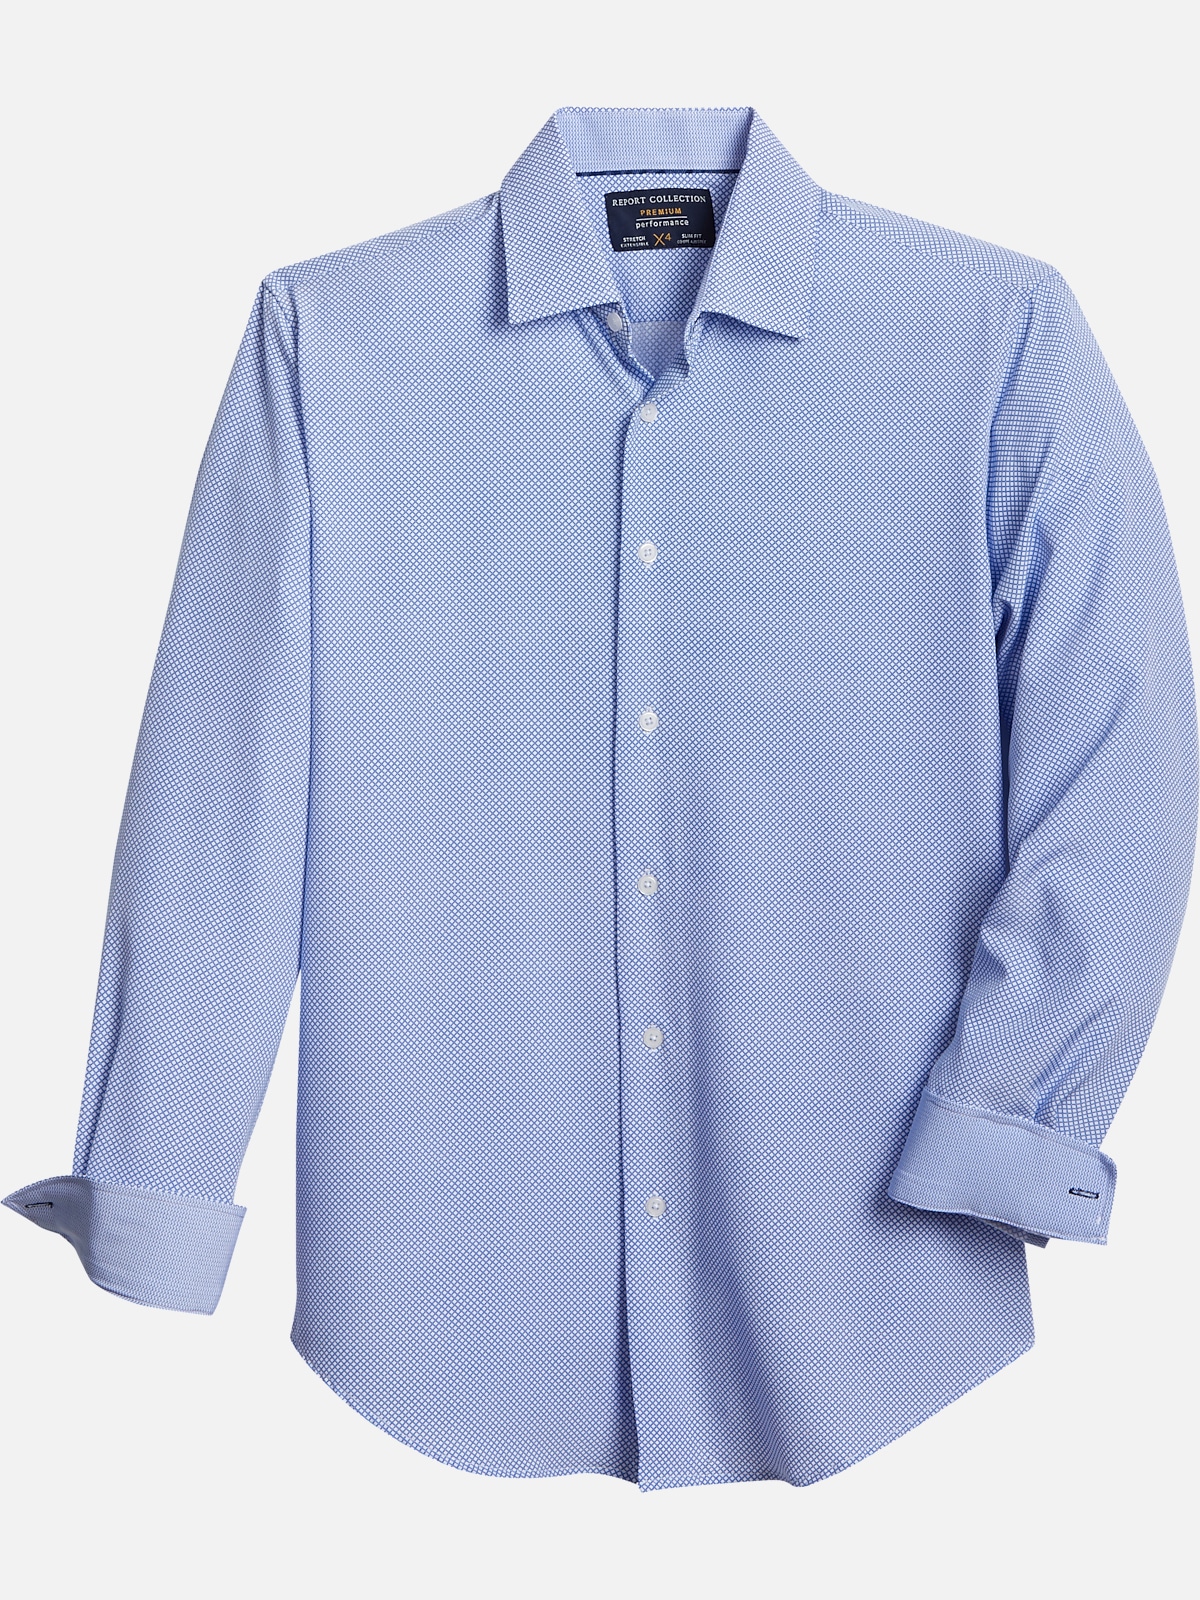 Report Collection Modern Fit 4-Way Stretch Sport Shirt | All Sale| Men's  Wearhouse